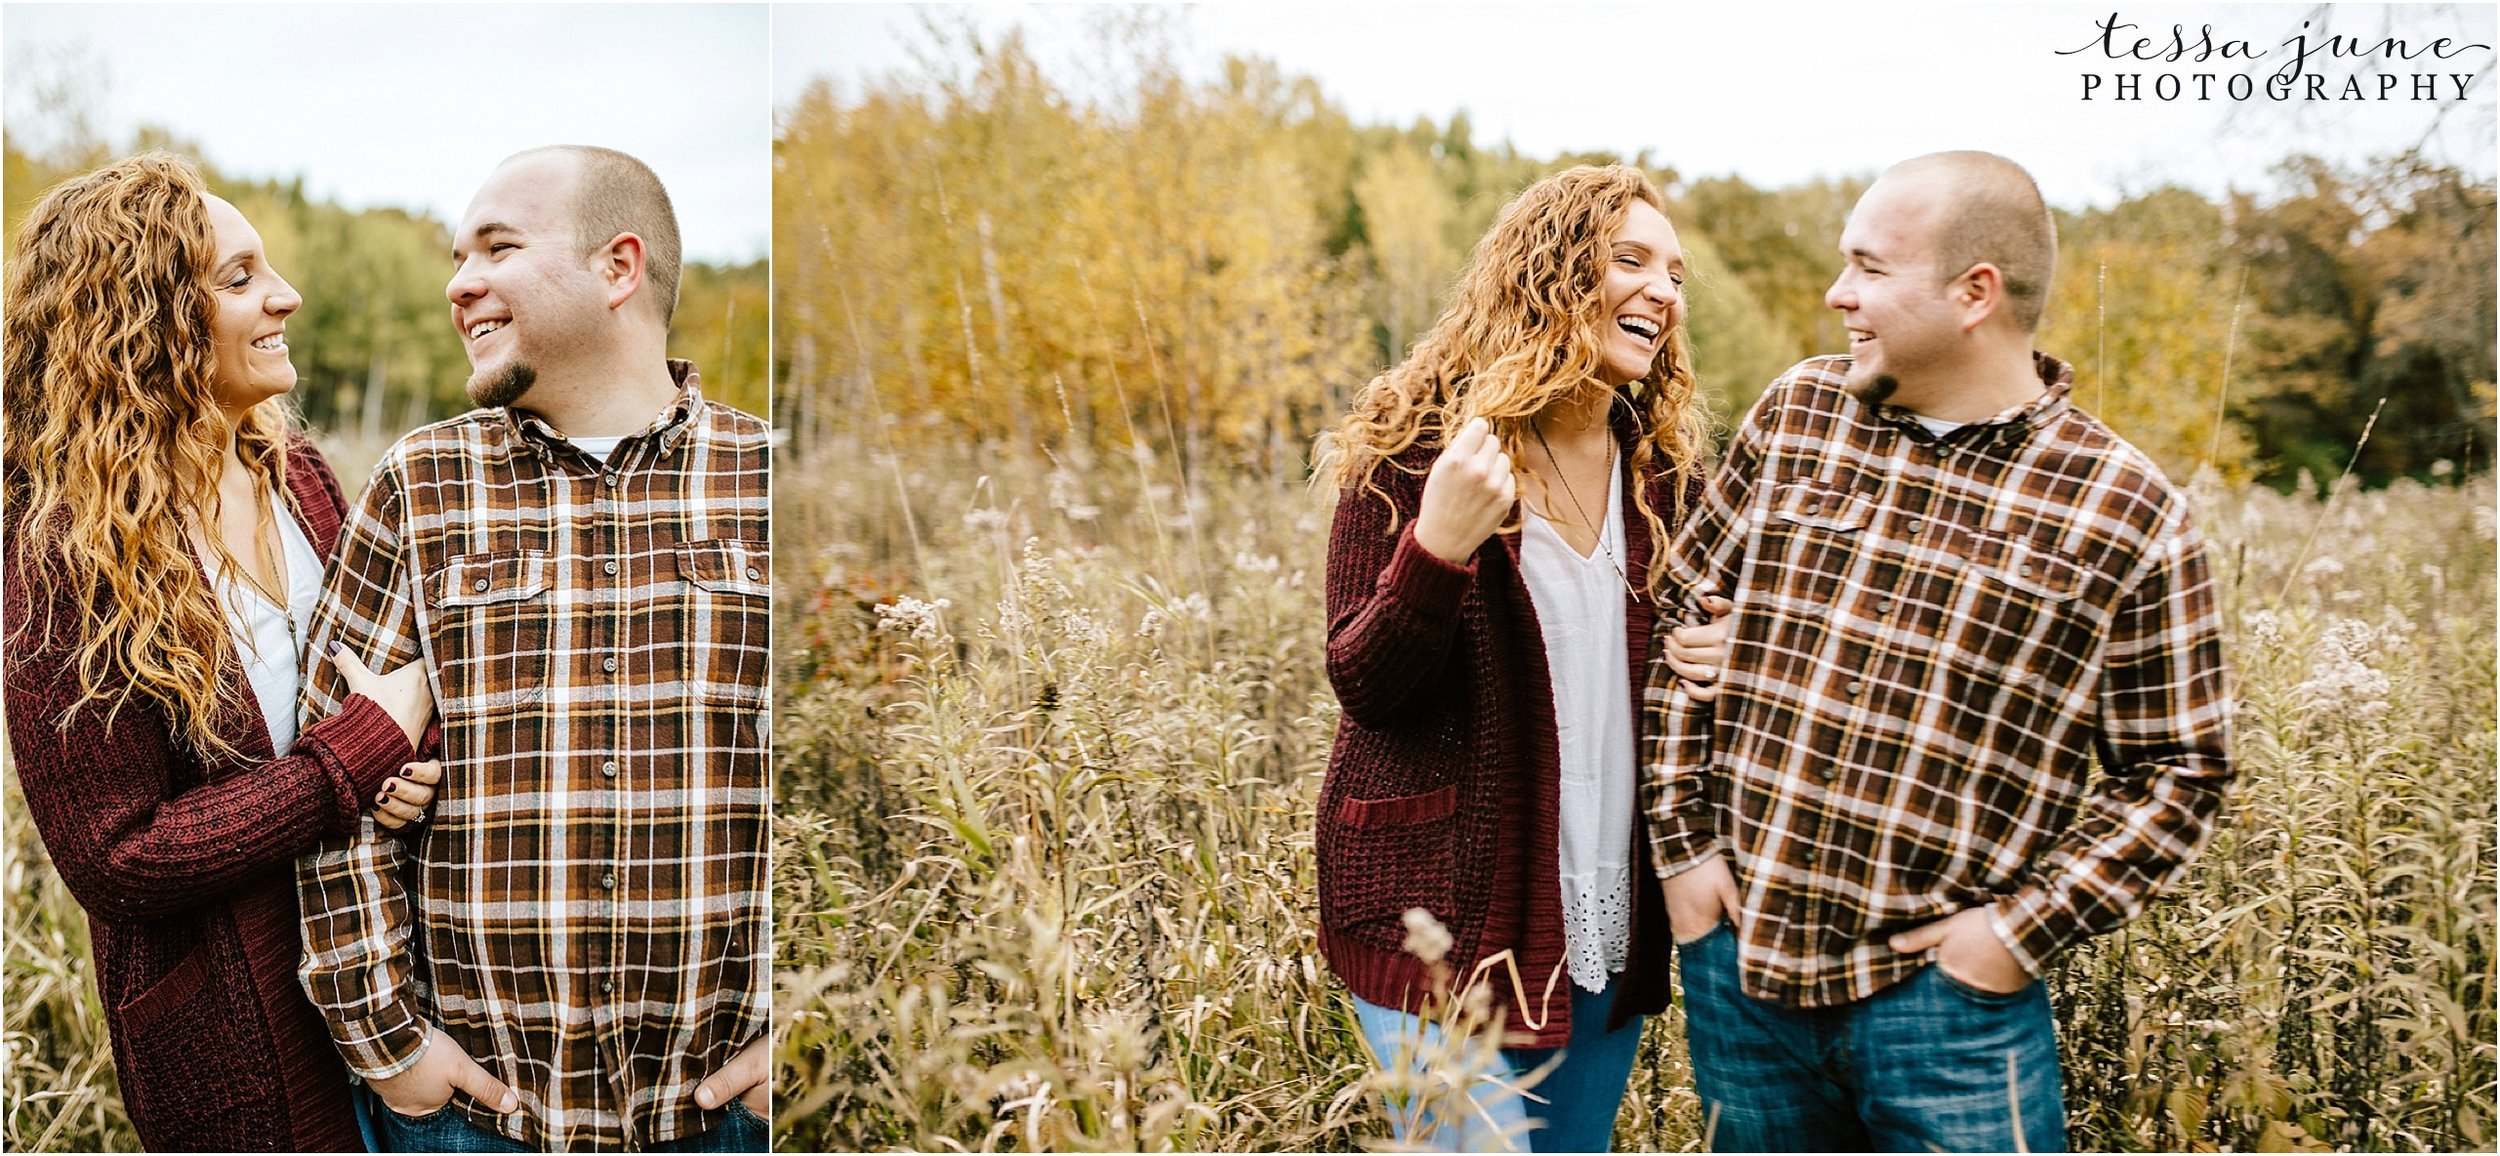 st-cloud-wedding-photographer-lake-maria-engagement-in-the-fall-21.jpg